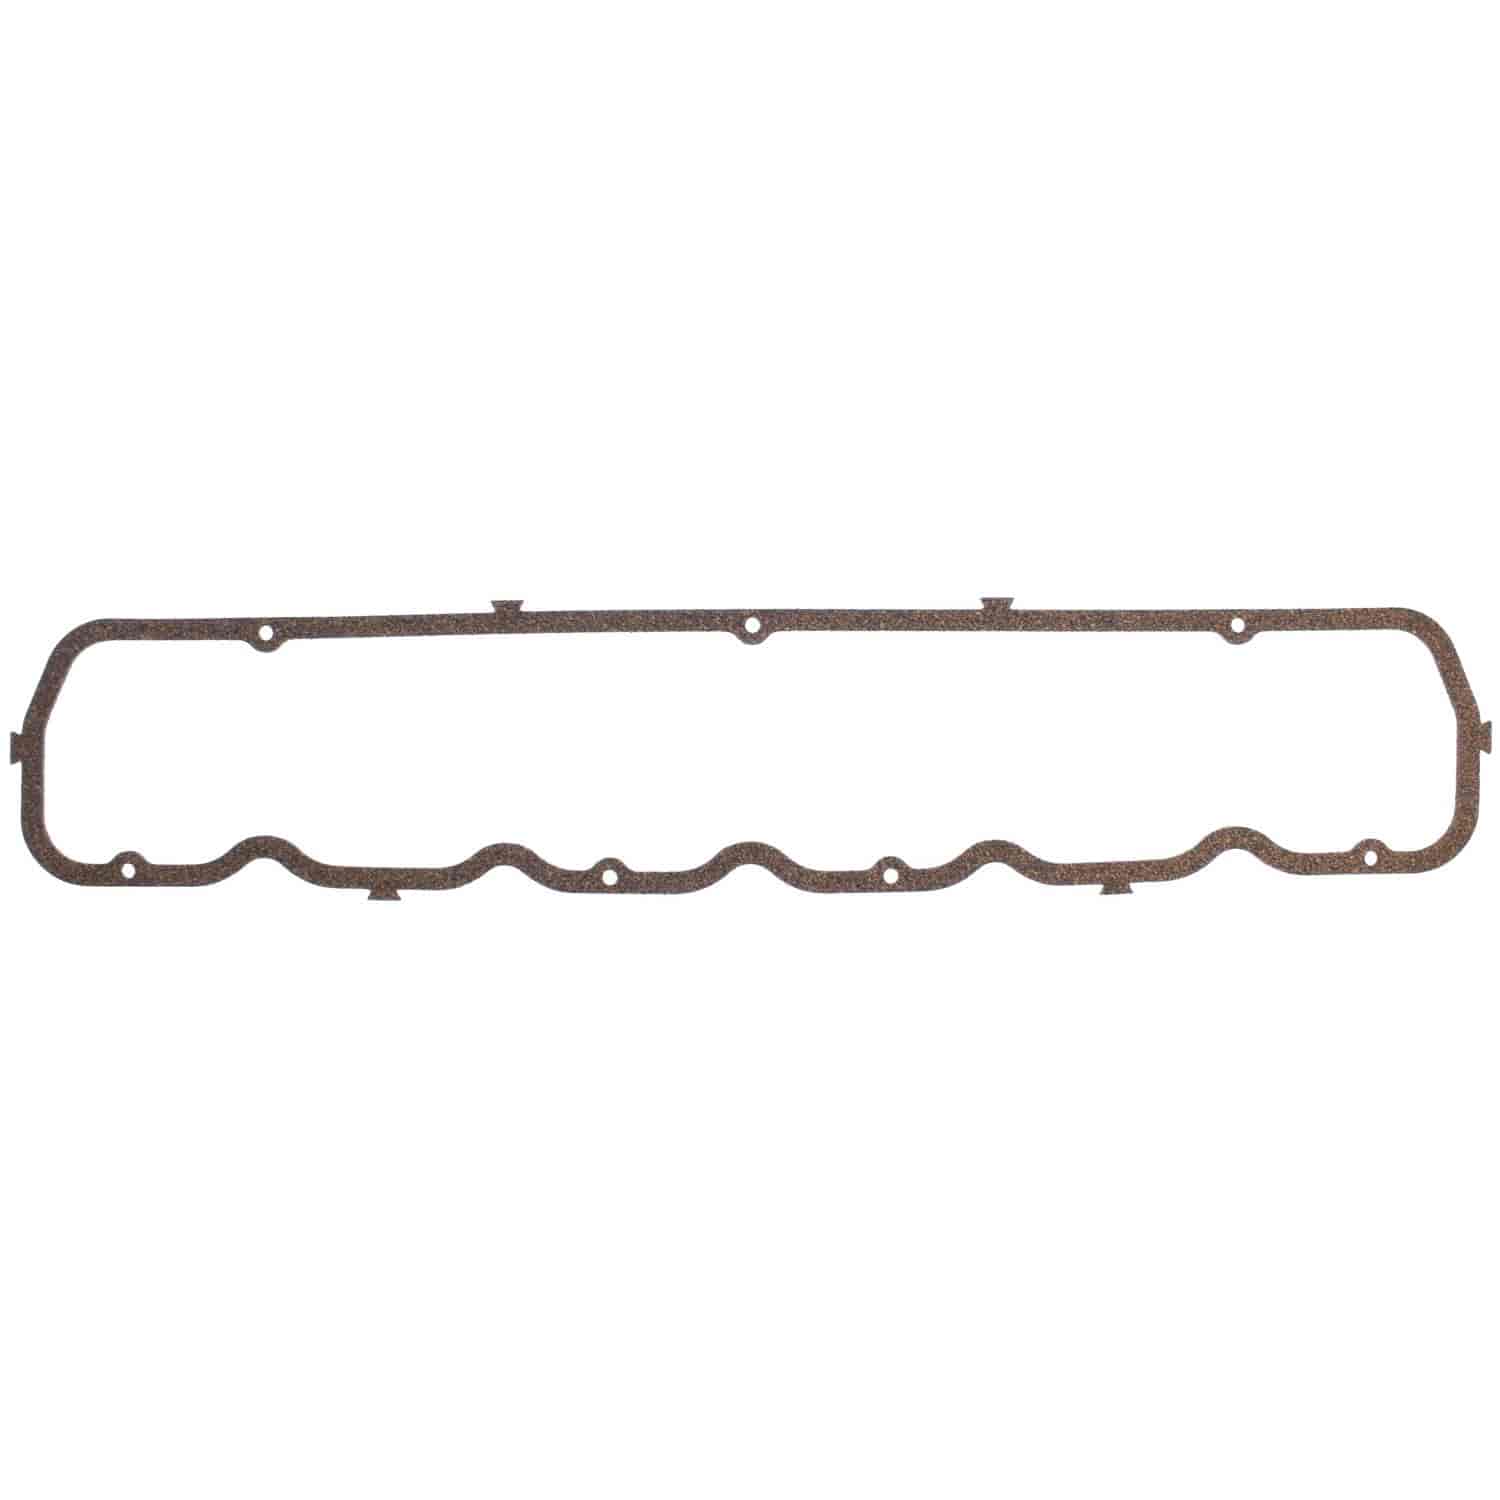 Valve Cover Gasket for 1962-1989 Chevy L6 194, 230, 250, 292 ci